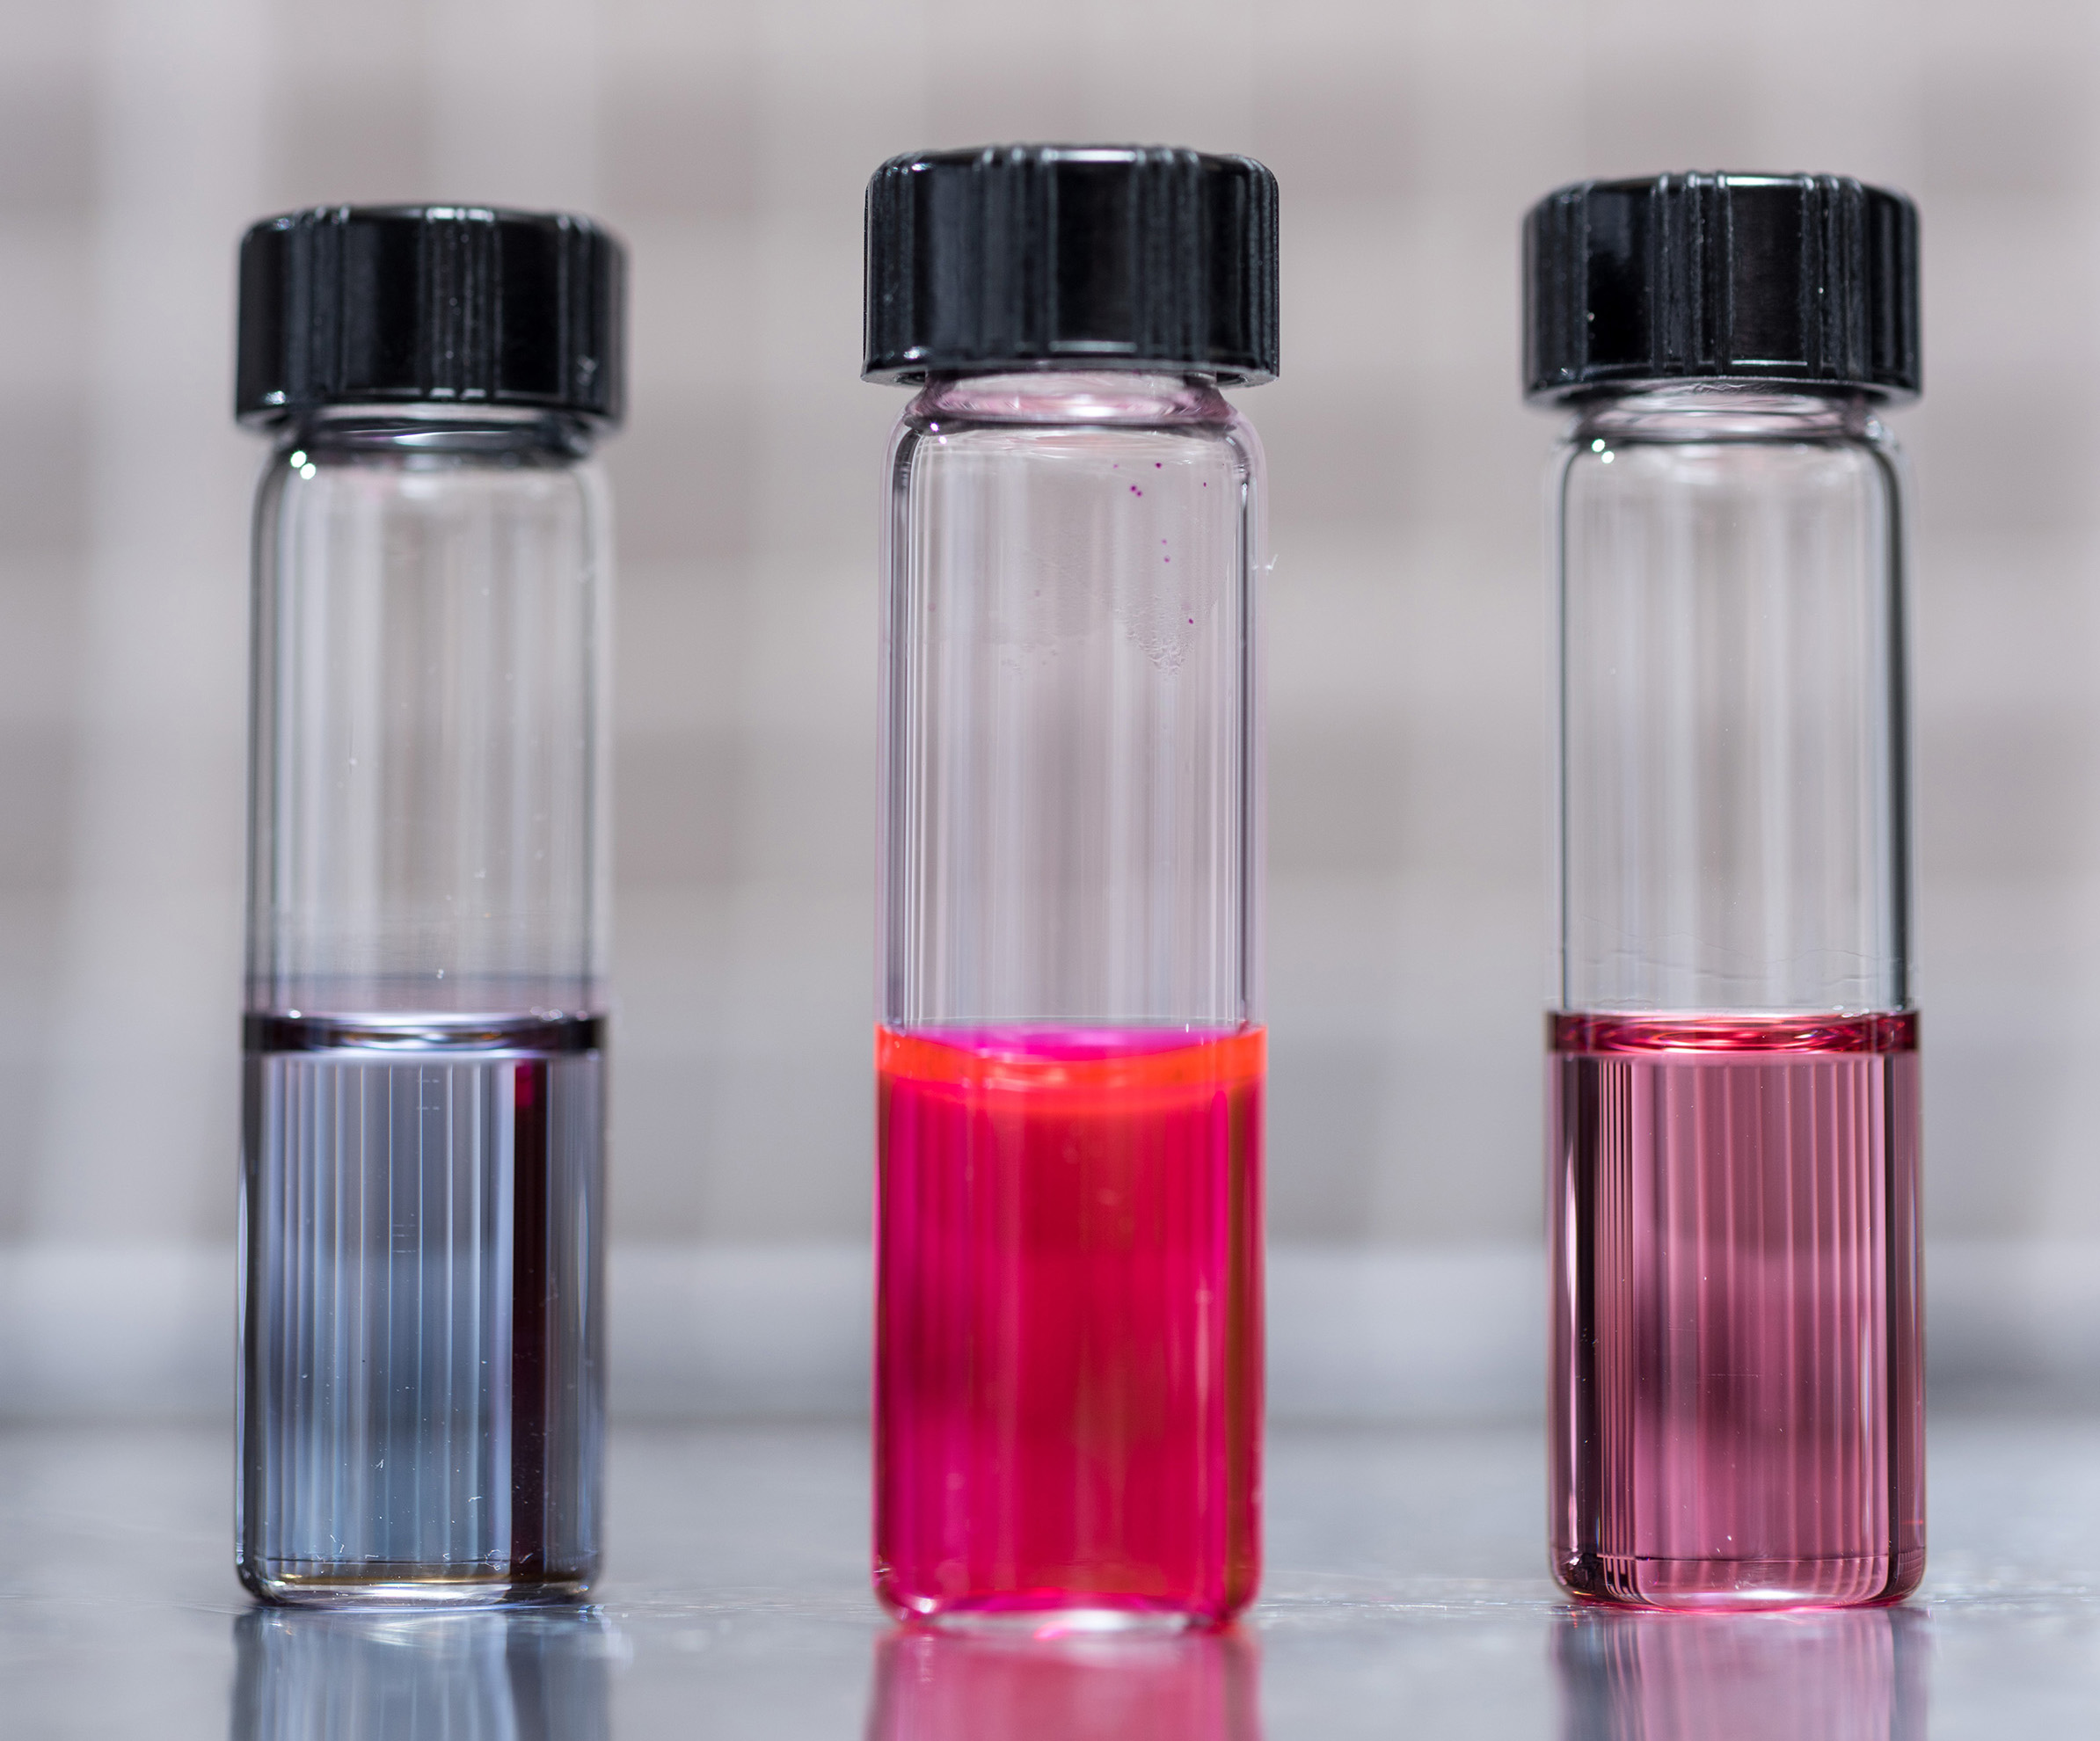 Image shows vials containing samples of hairy nanoparticles. The right and left images contain photo-responsive polymer-capped gold nanoparticles prior to and after self-assembly, respectively. The center vial shows dye released from self-assembled gold nanoparticles. The nanoparticles are made with light-sensitive materials that assemble and disassemble themselves when exposed to light of different wavelengths. (Credit: Rob Felt, Georgia Tech)